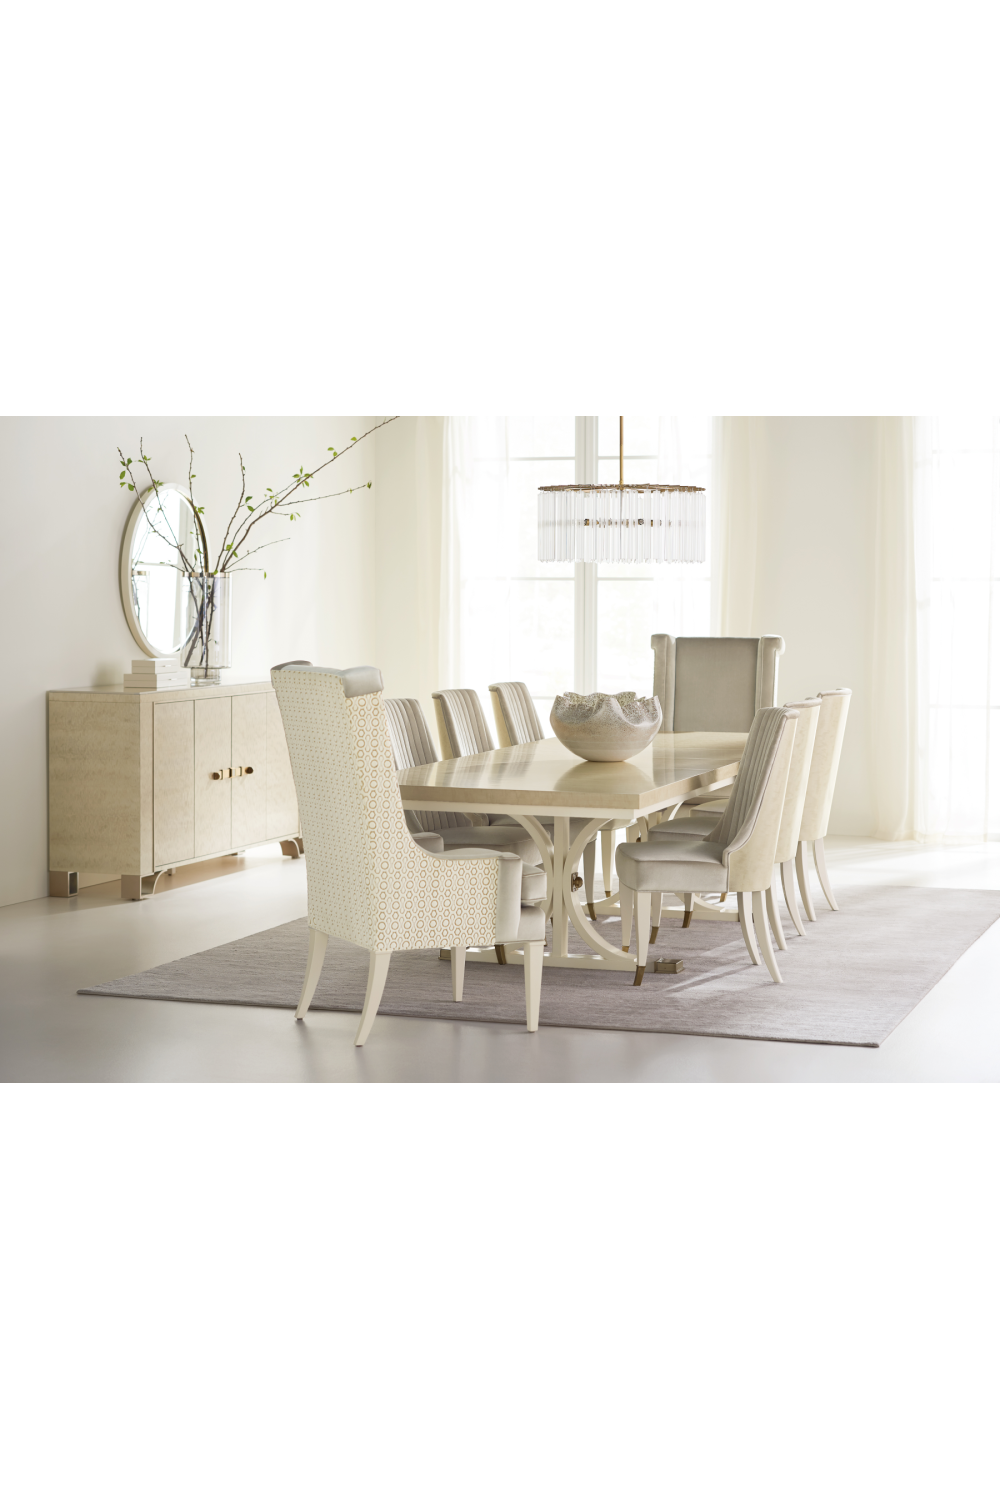 Tailored Modern Dining Chair | Caracole Line Me Up | Oroa.com